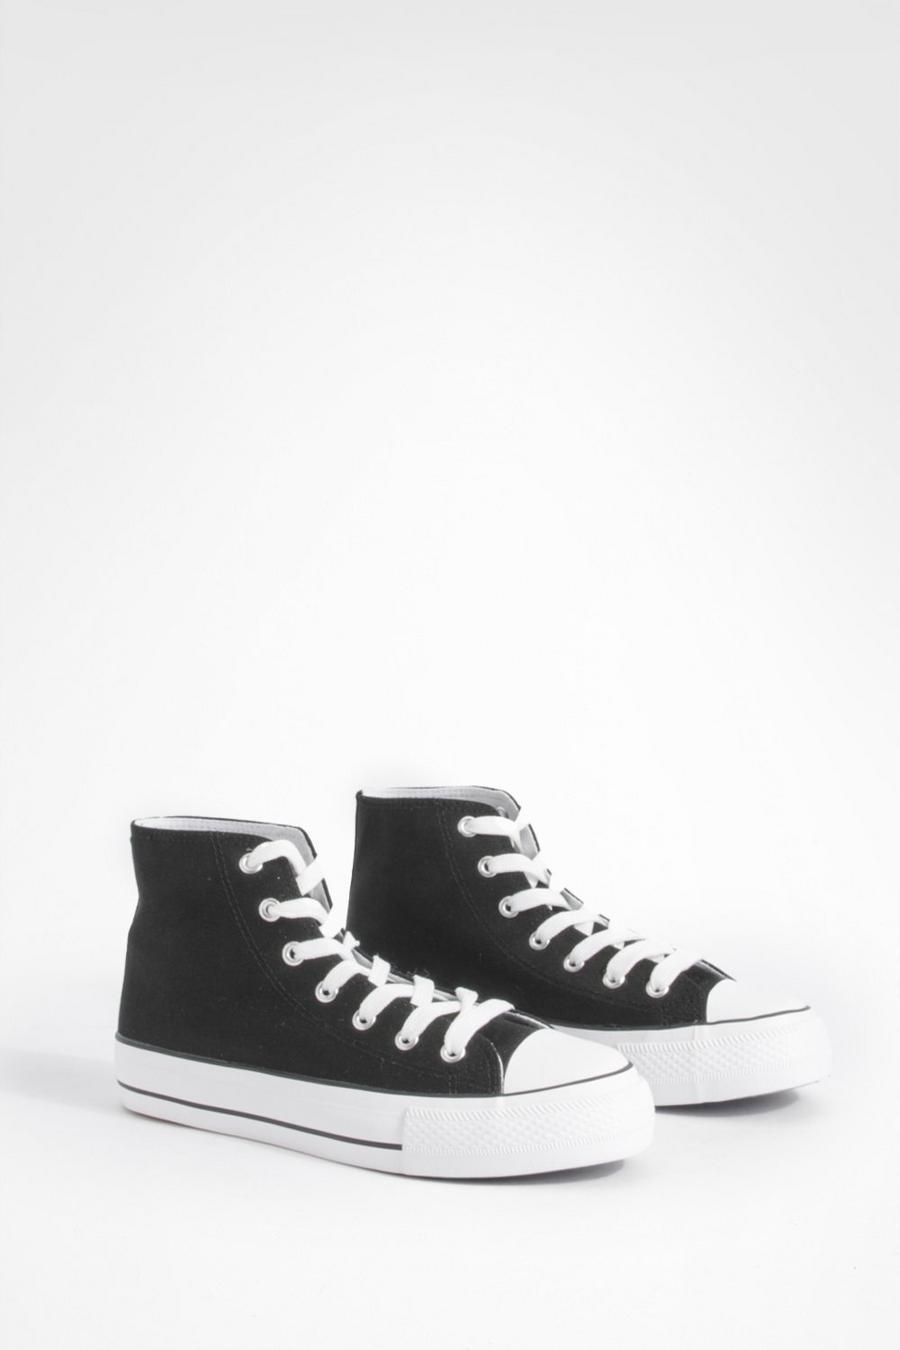 Black Platform High Top Lace Up Trainers   